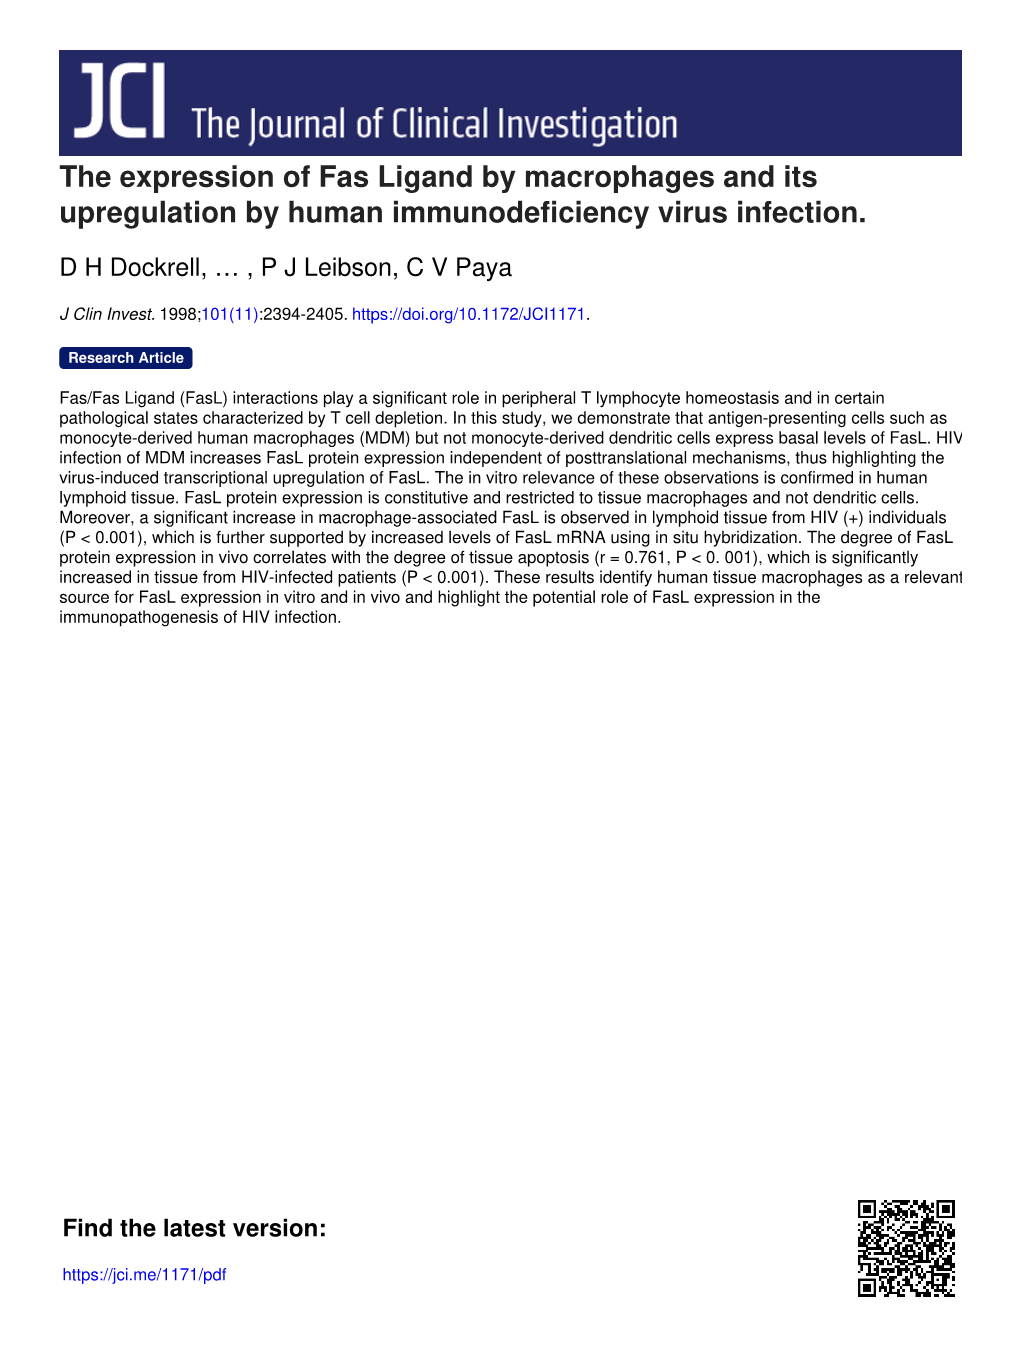 The Expression of Fas Ligand by Macrophages and Its Upregulation by Human Immunodeficiency Virus Infection